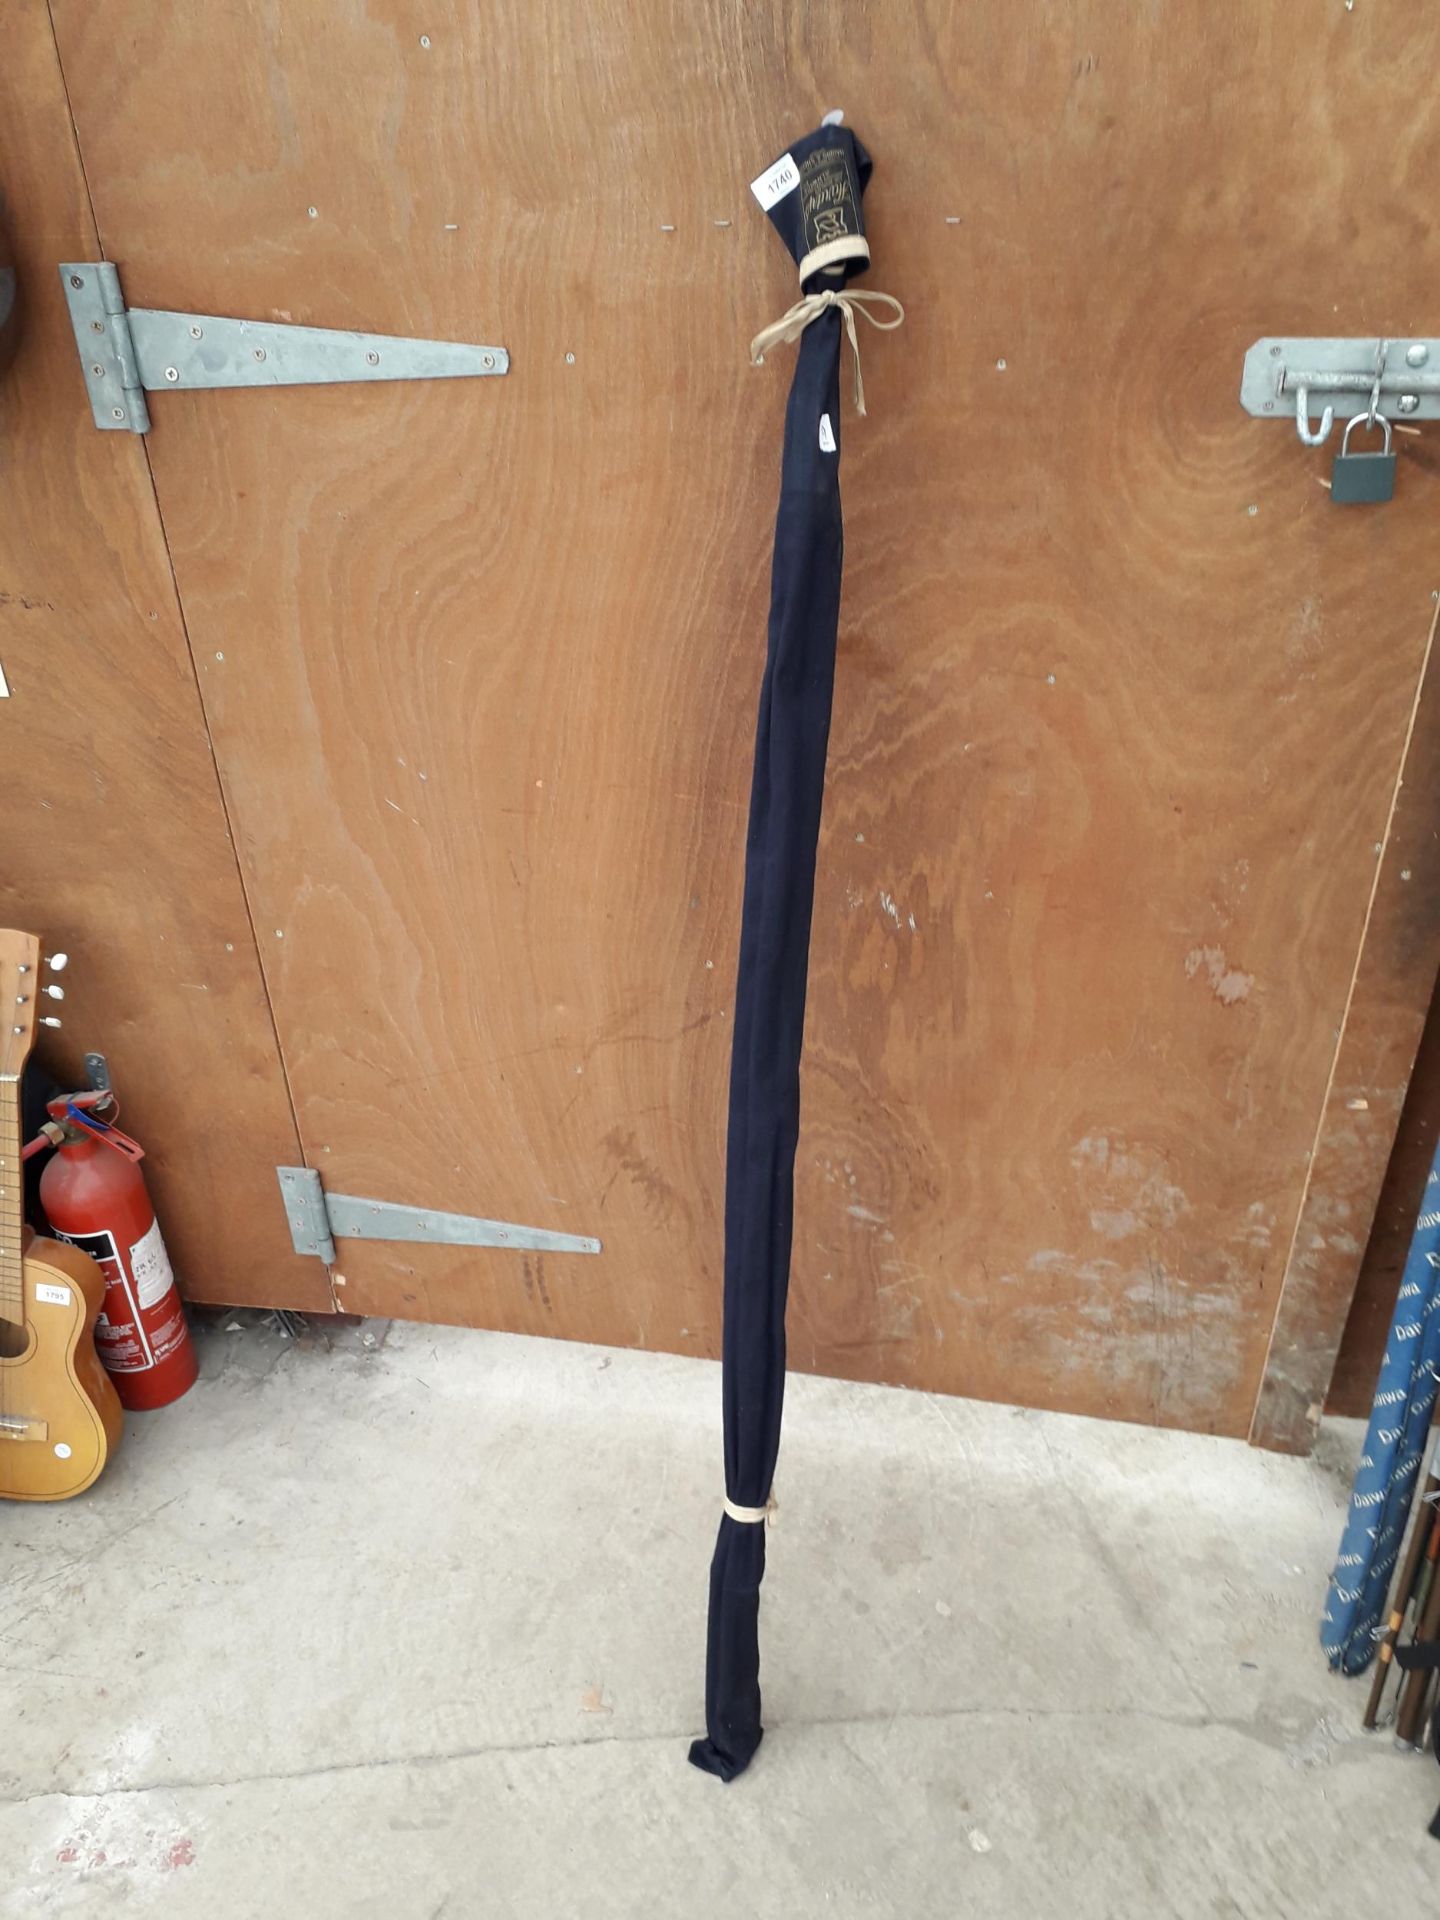 A HARDY JET 9.5' FIBALITE SPINING FISHING ROD IN ORIGINAL BAG - Image 4 of 4